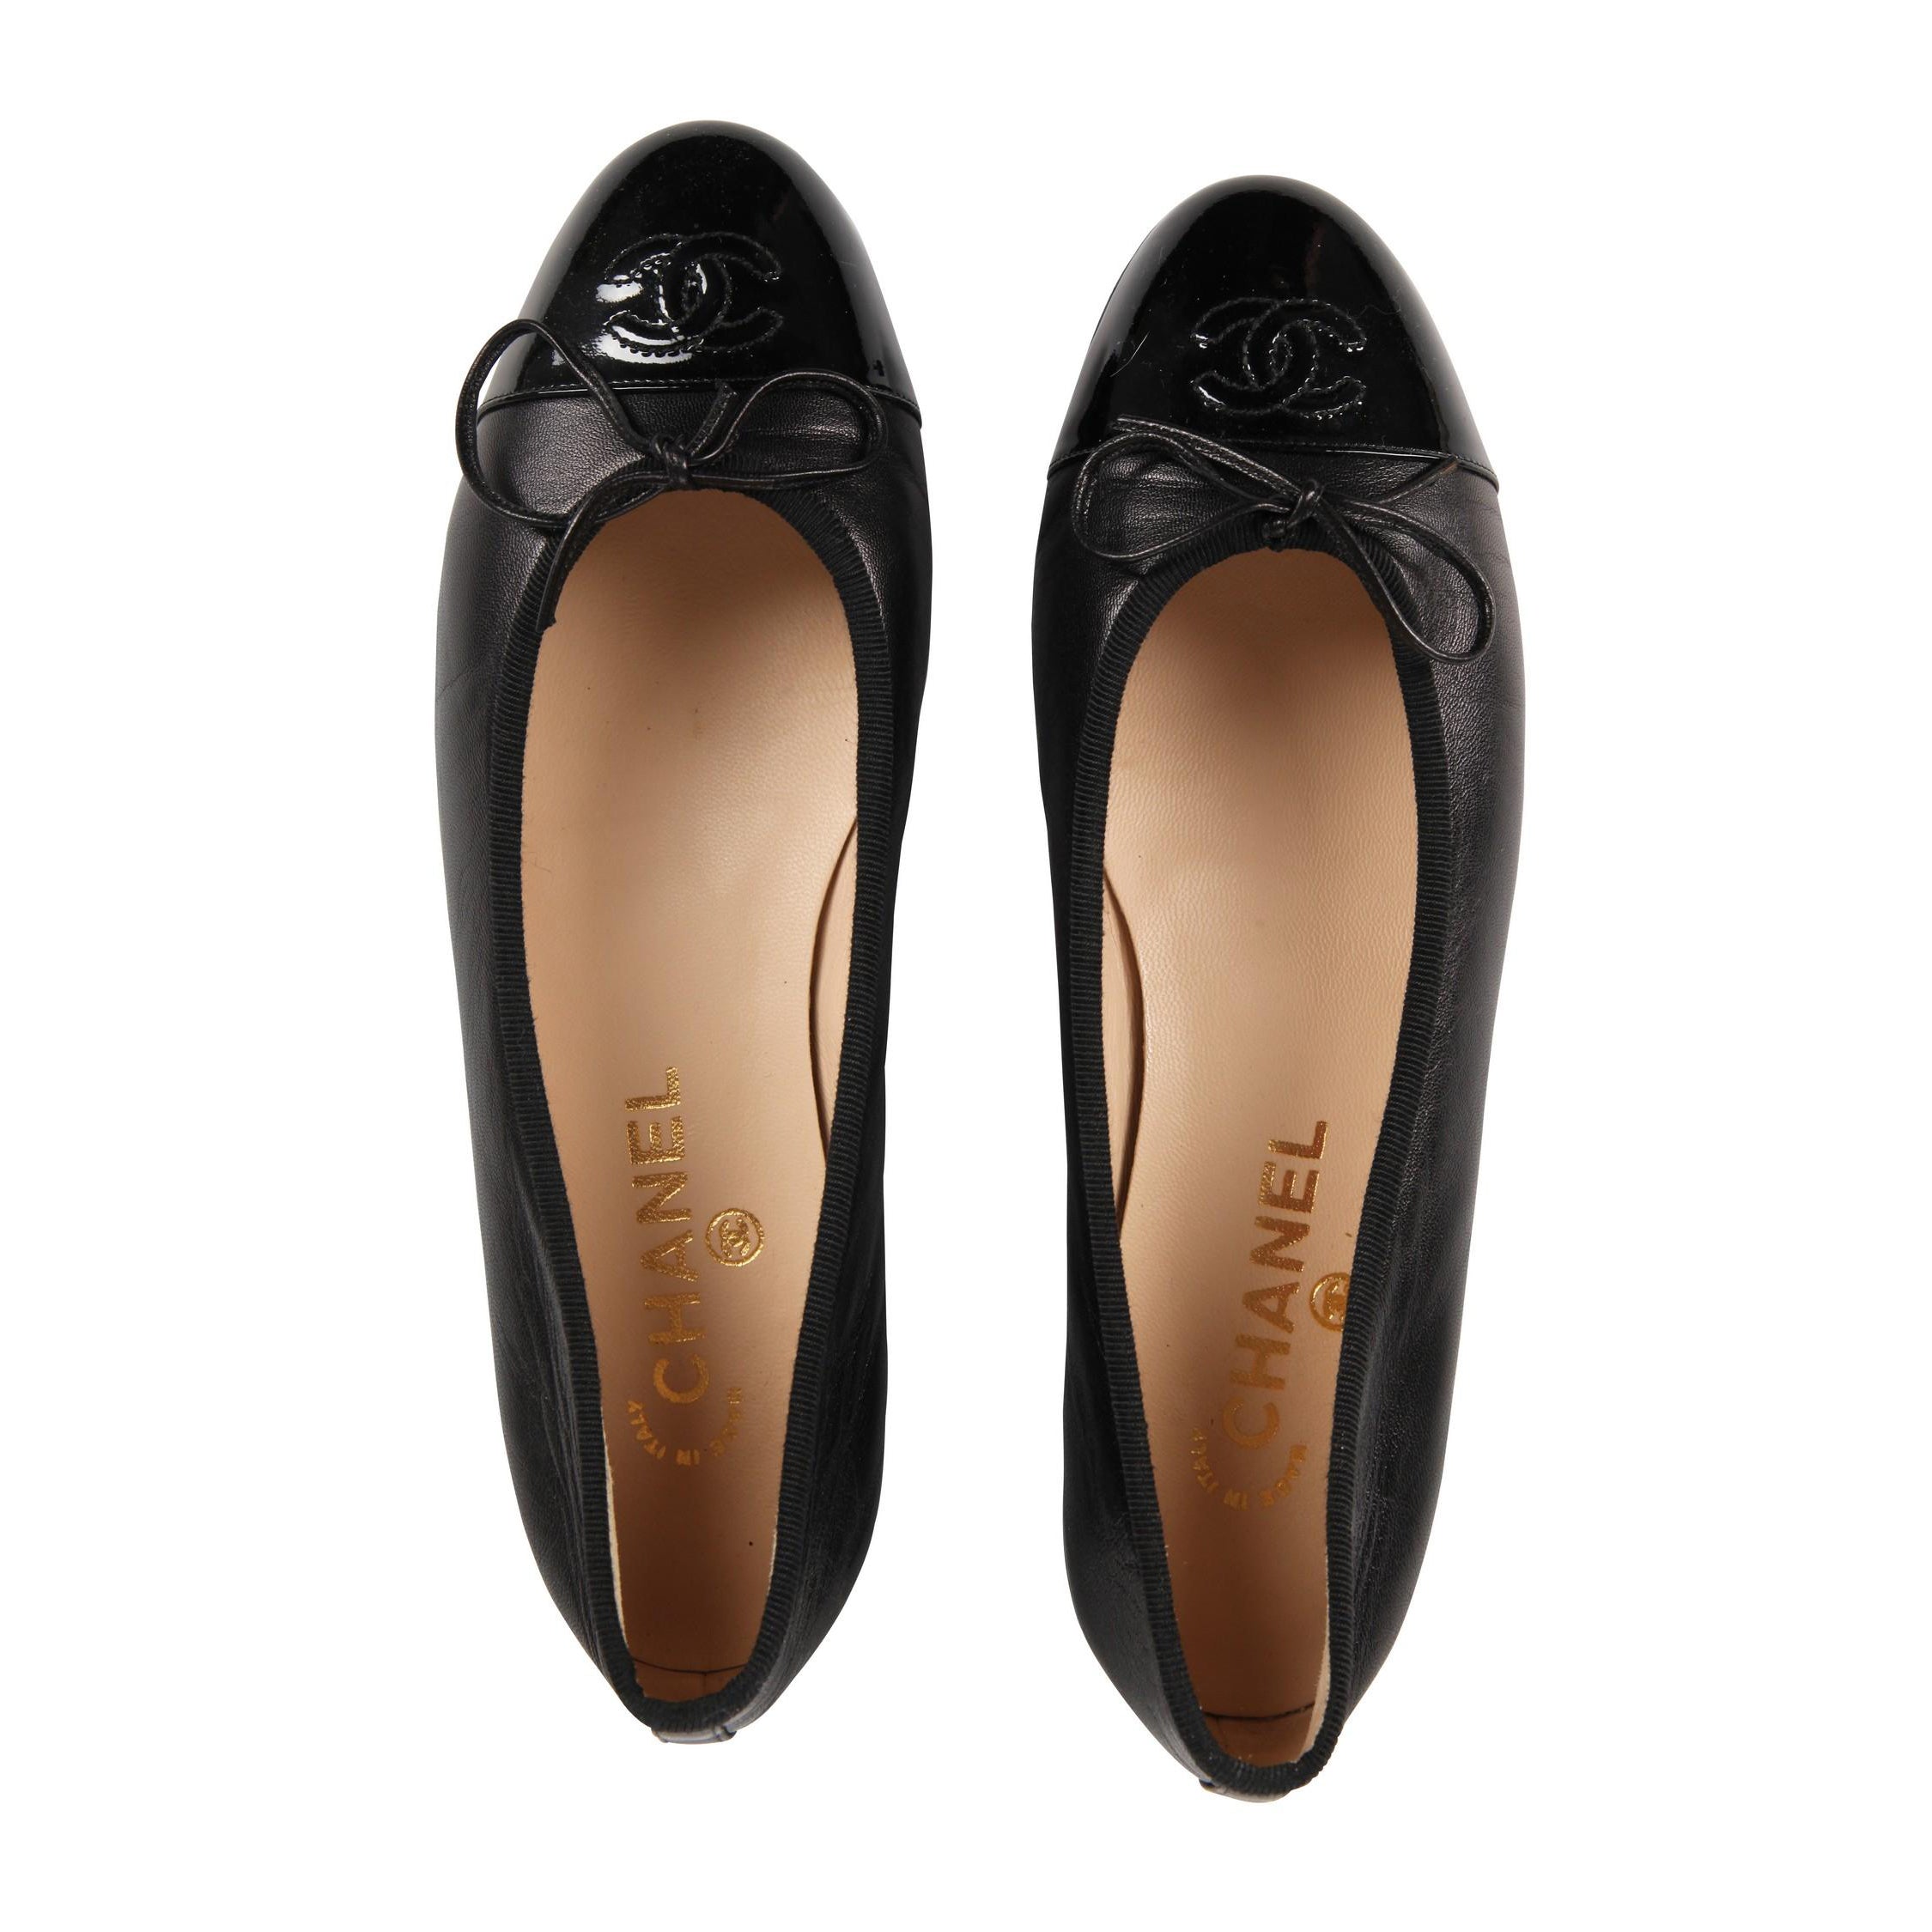 Leather ballet flats Chanel Black size 38.5 EU in Leather - 22619546